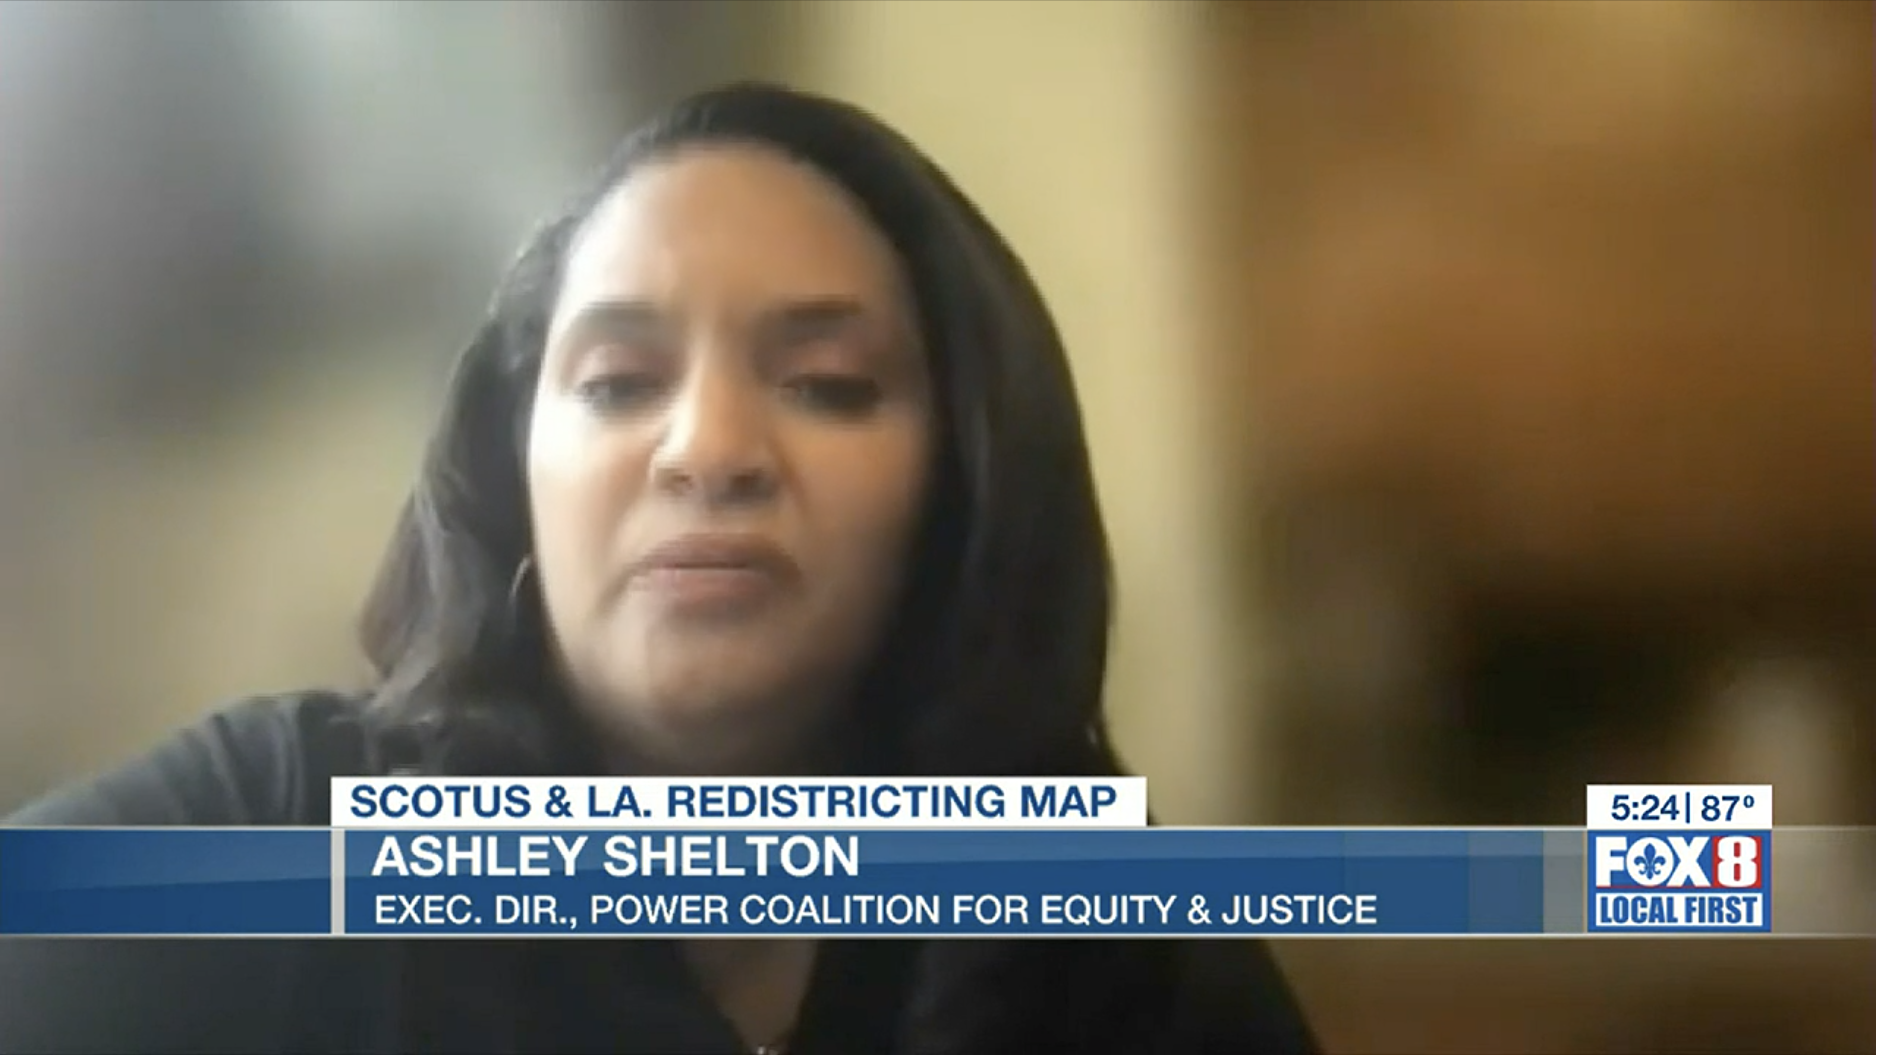 Voting rights advocates welcome the Supreme Court’s ruling related to La’s redistricting